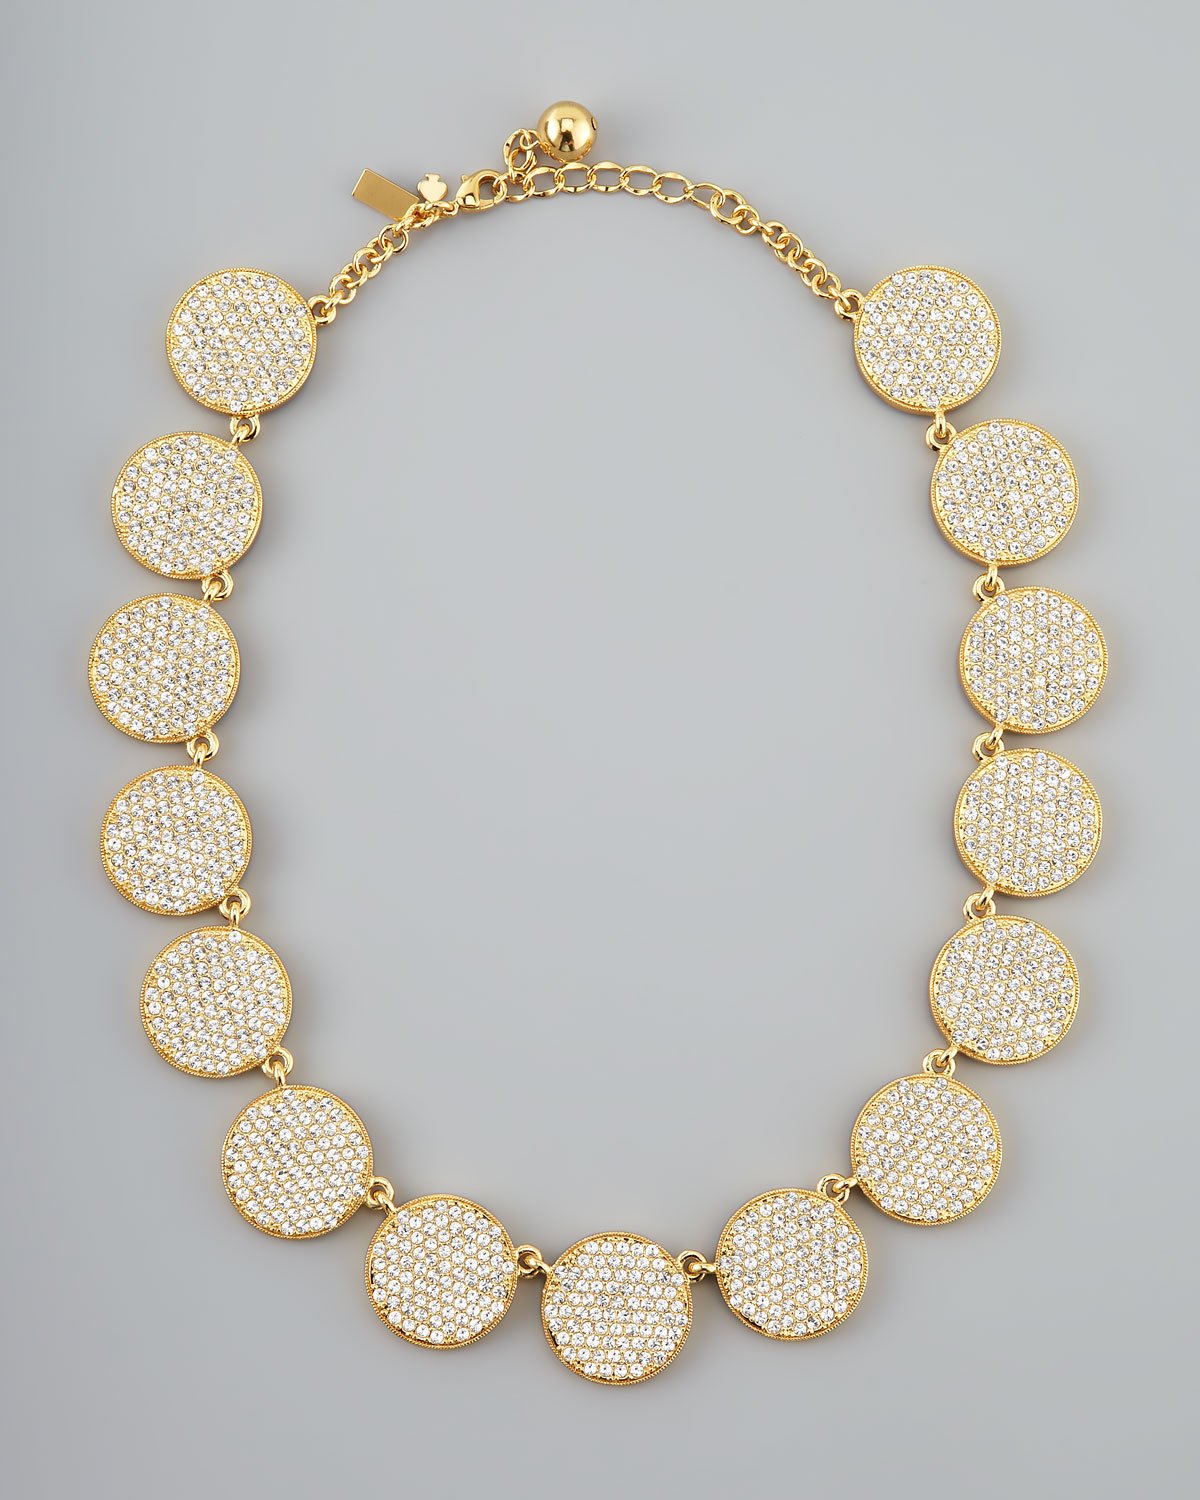 Kate Spade Bright Spot Crystal Collar Necklace in Gold (Metallic) - Lyst